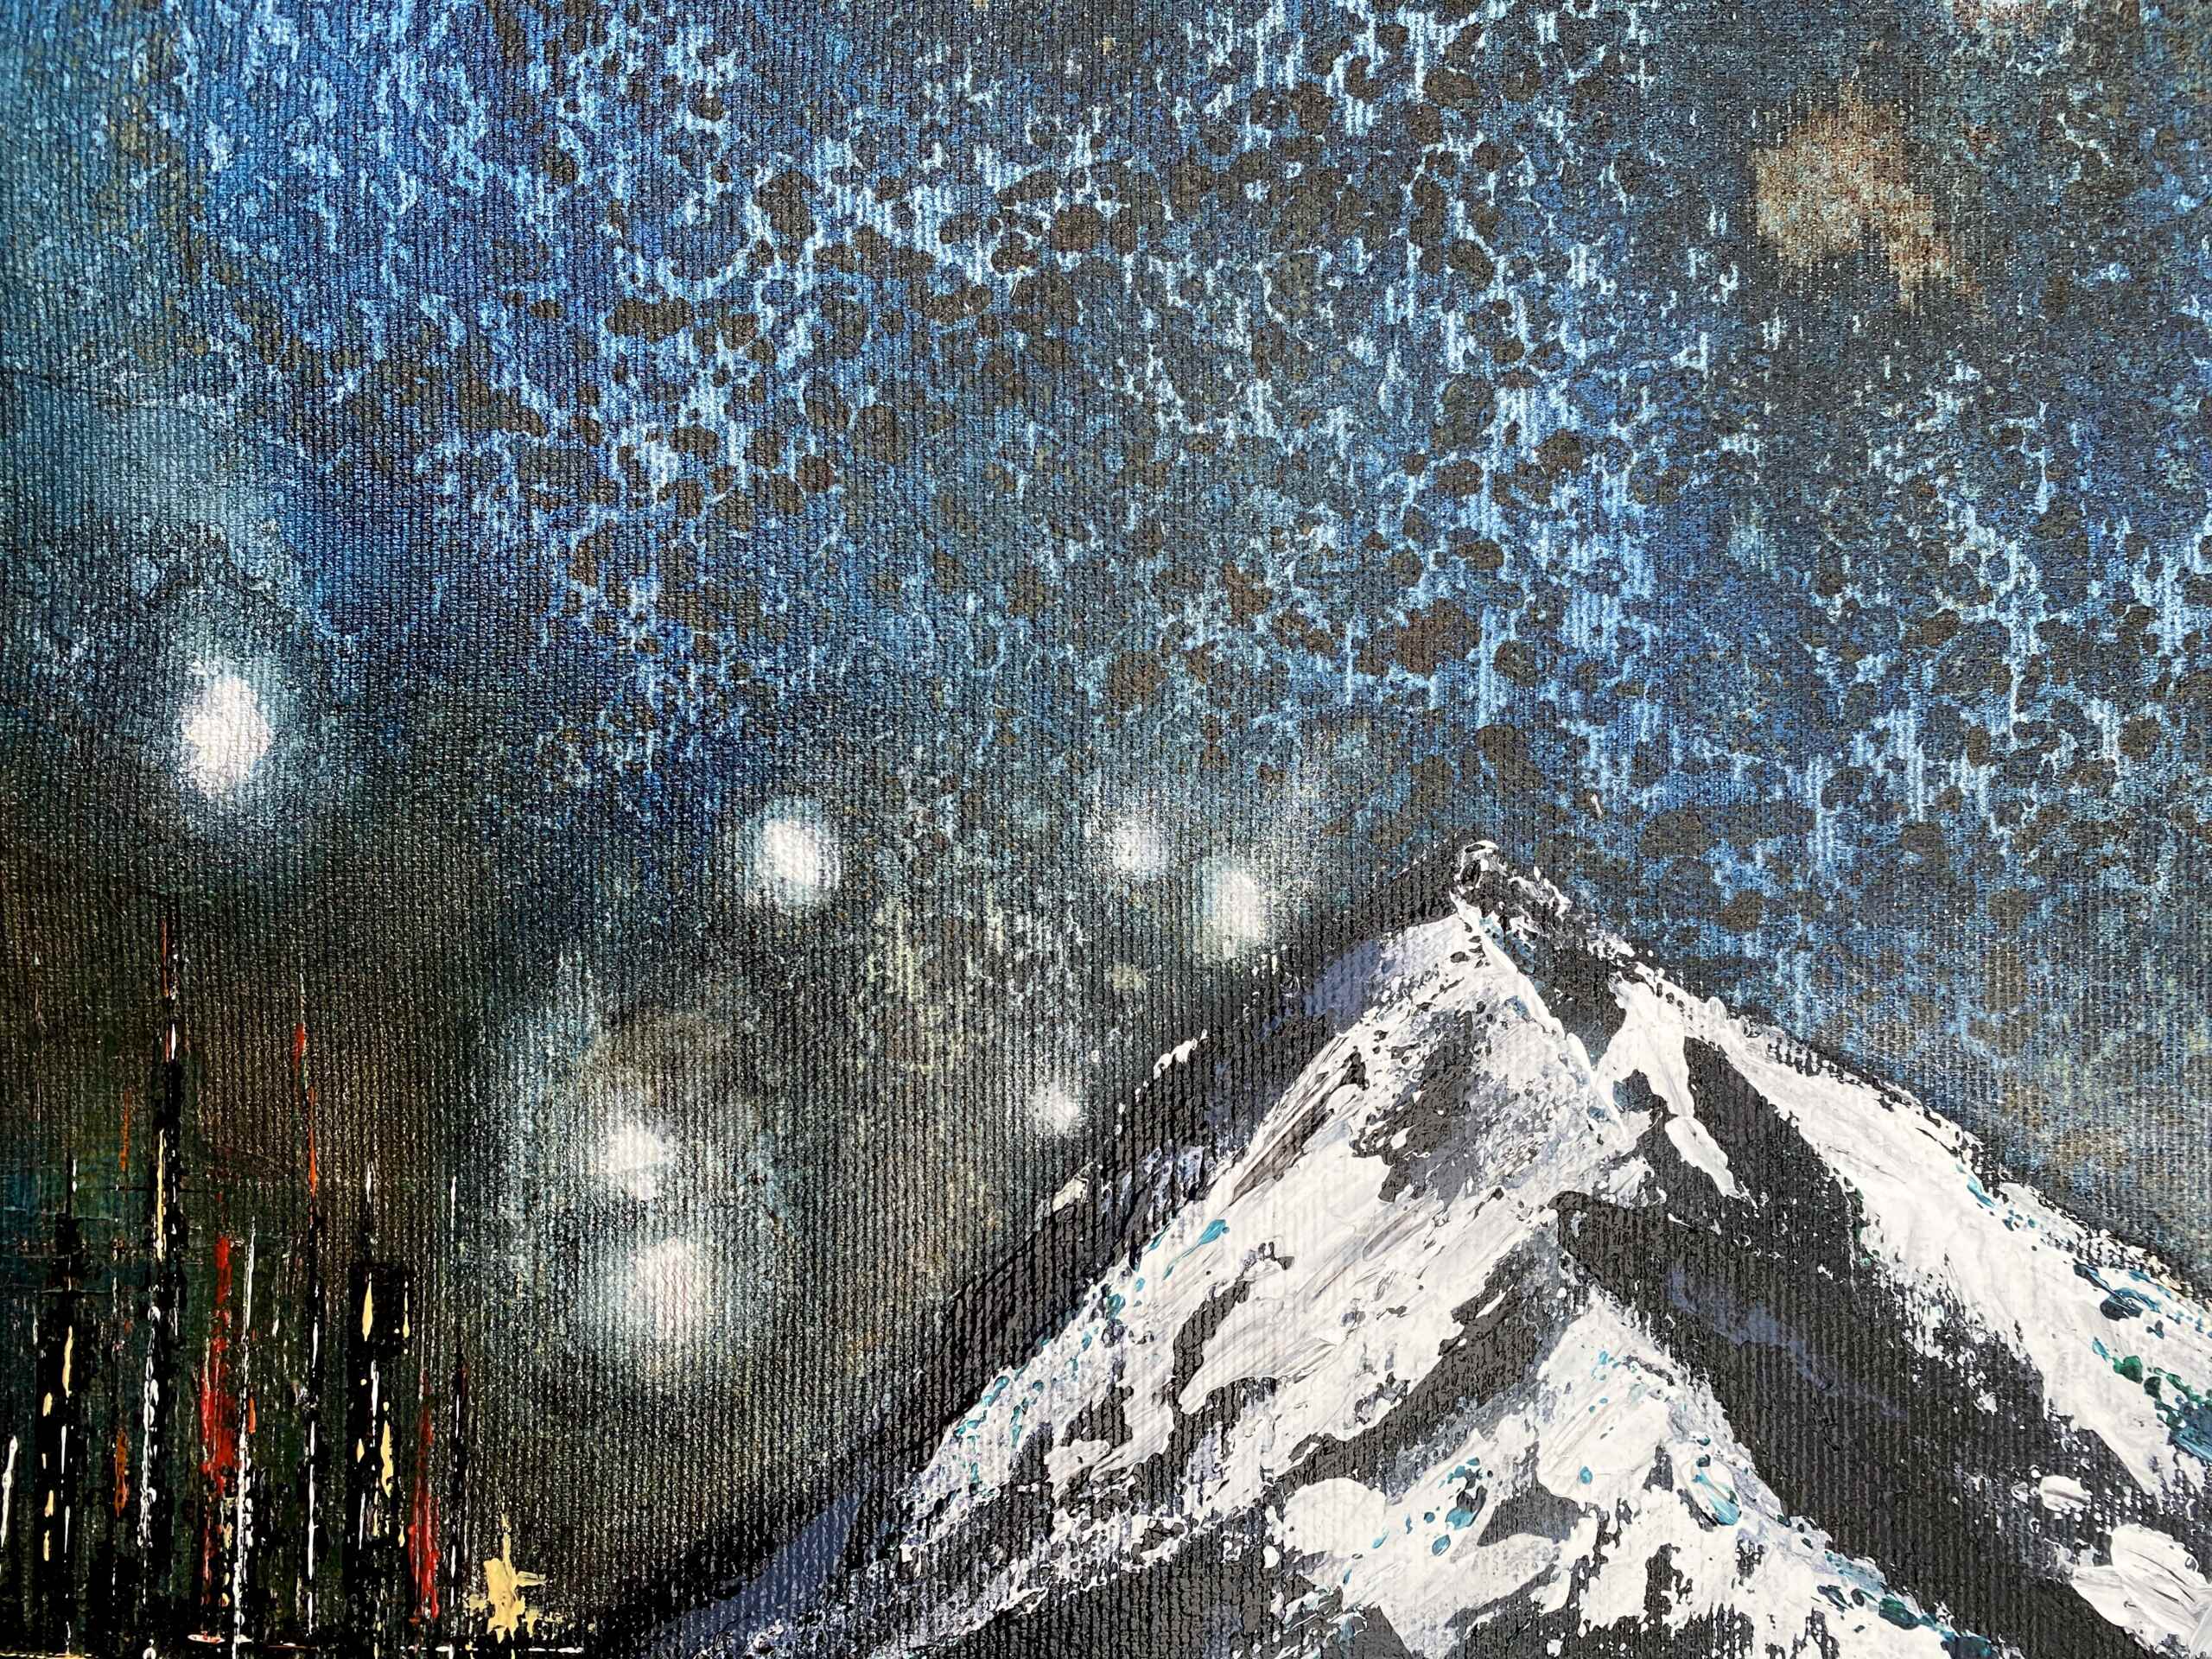 Detail of artwork "Below the Firmament" by Nina Groth